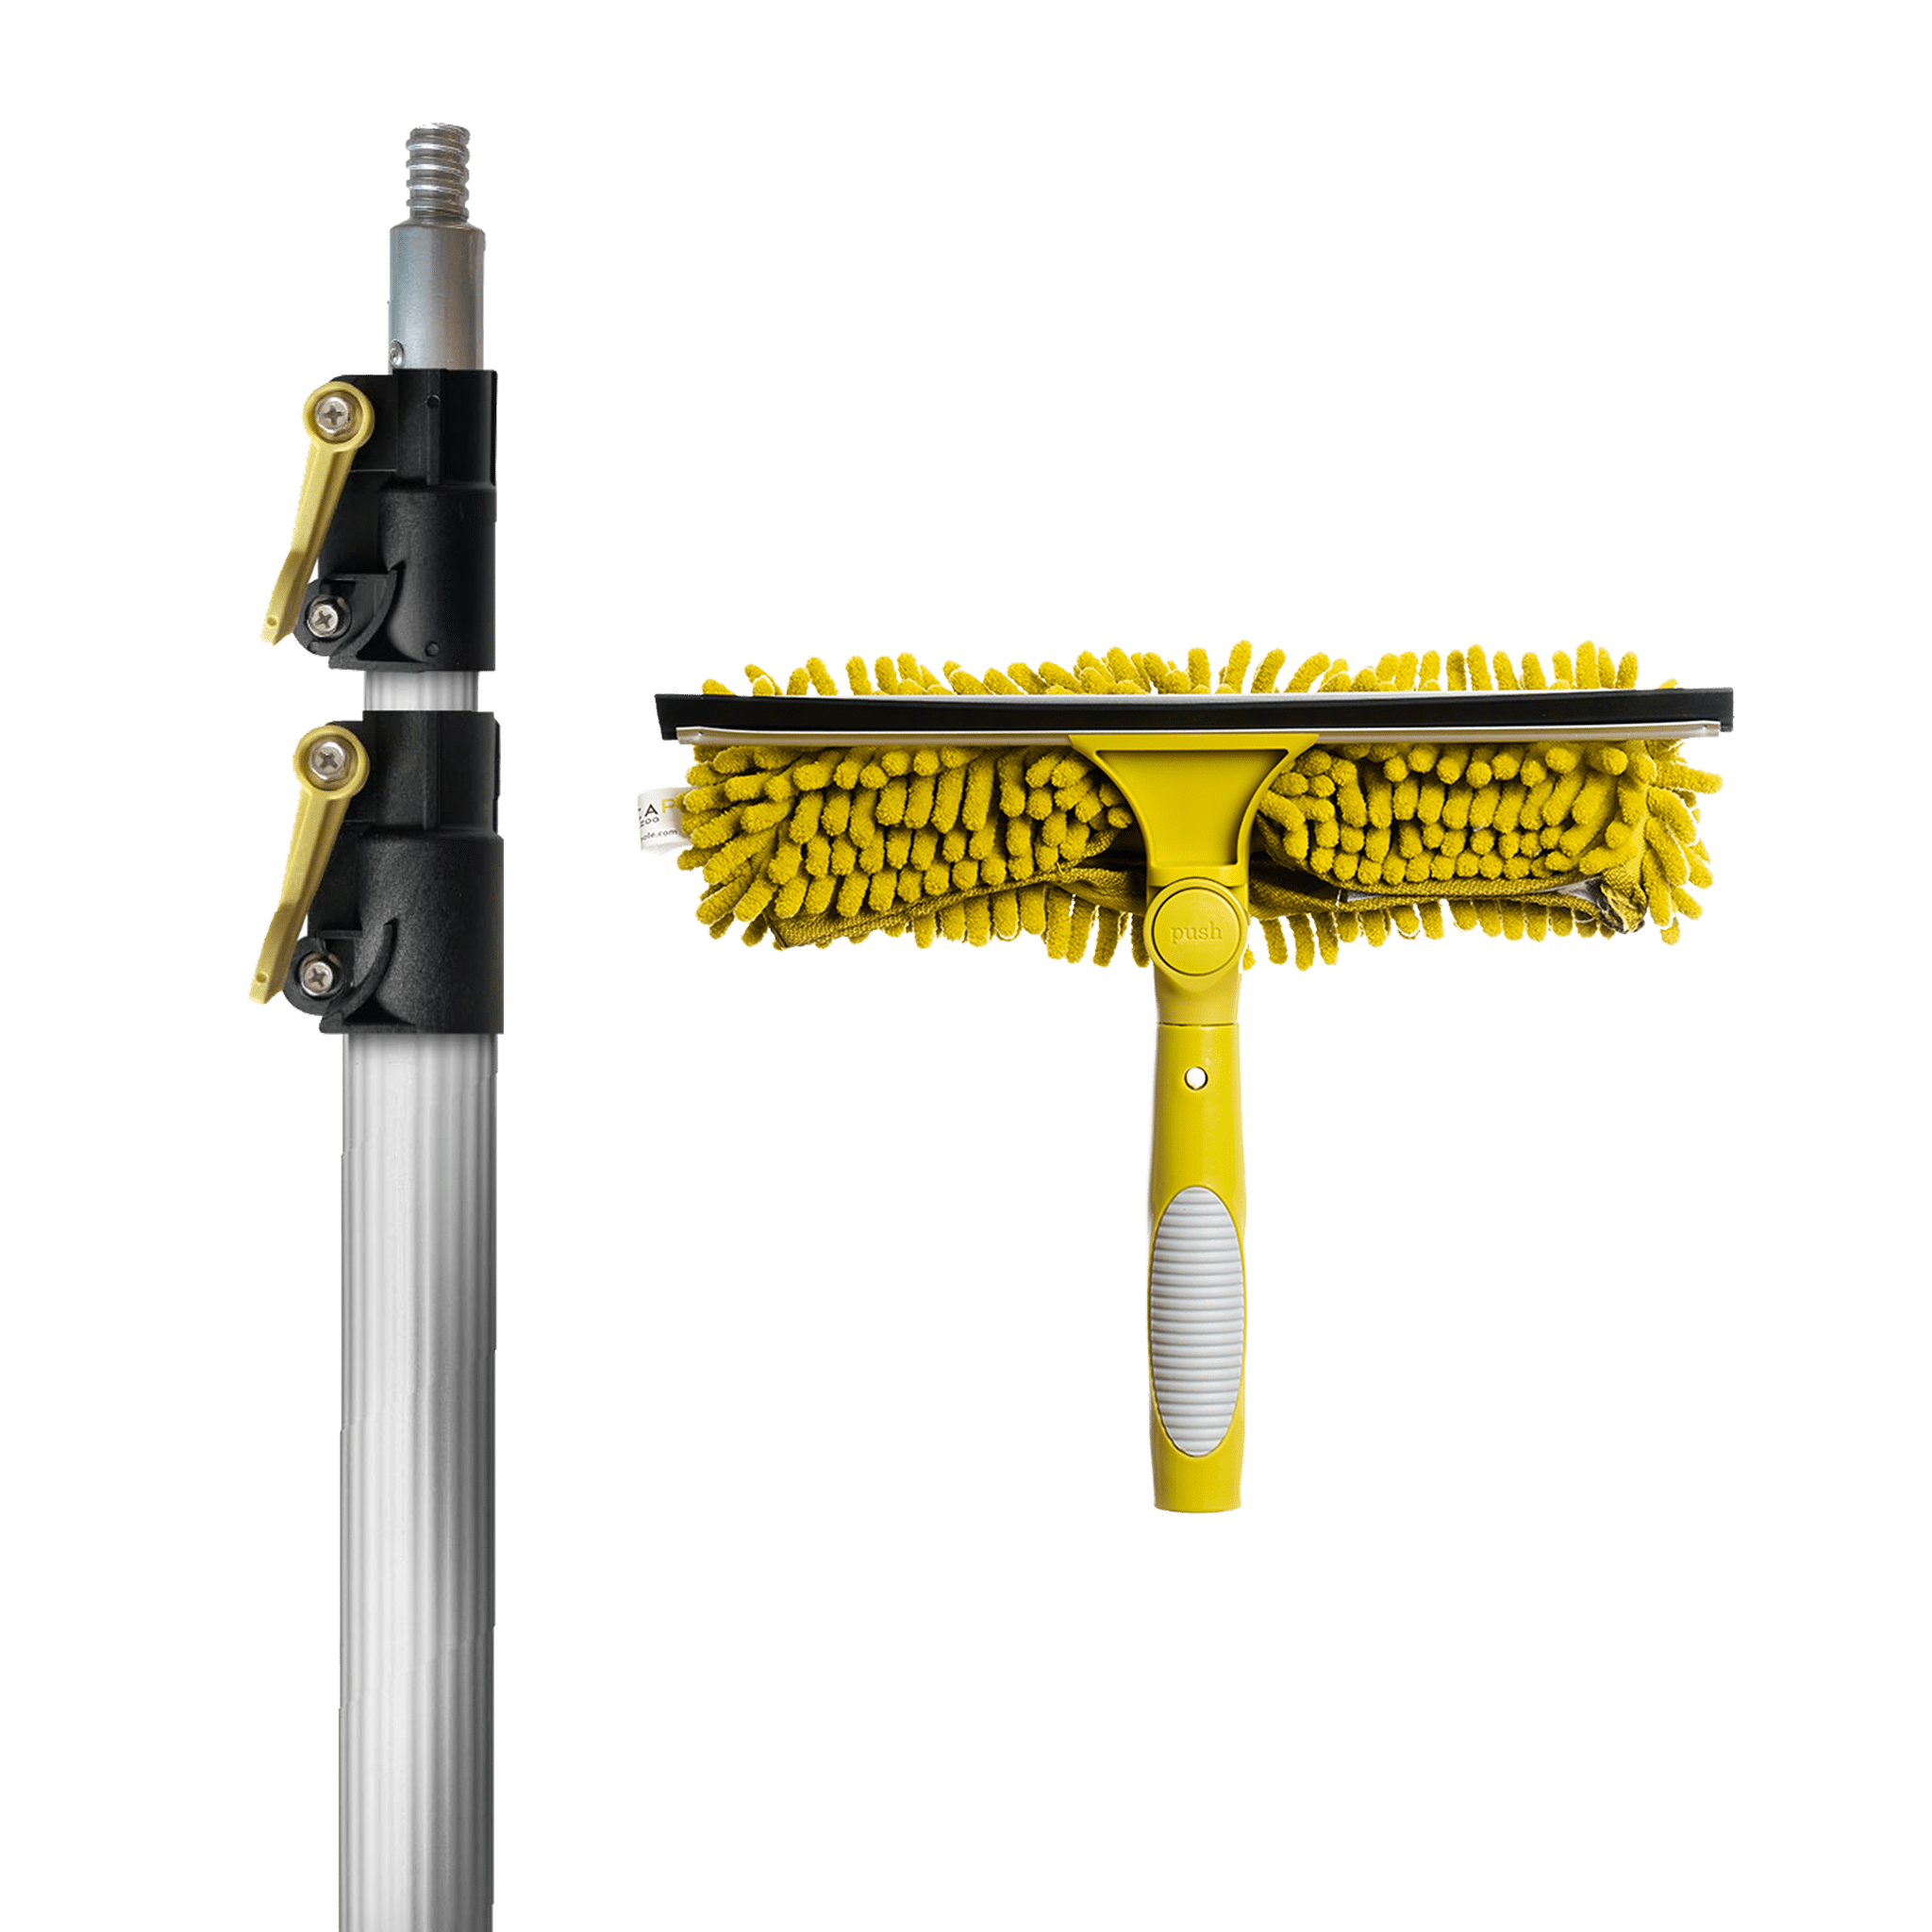 Shop Telescopic Window Squeegee With Extension Pole with great